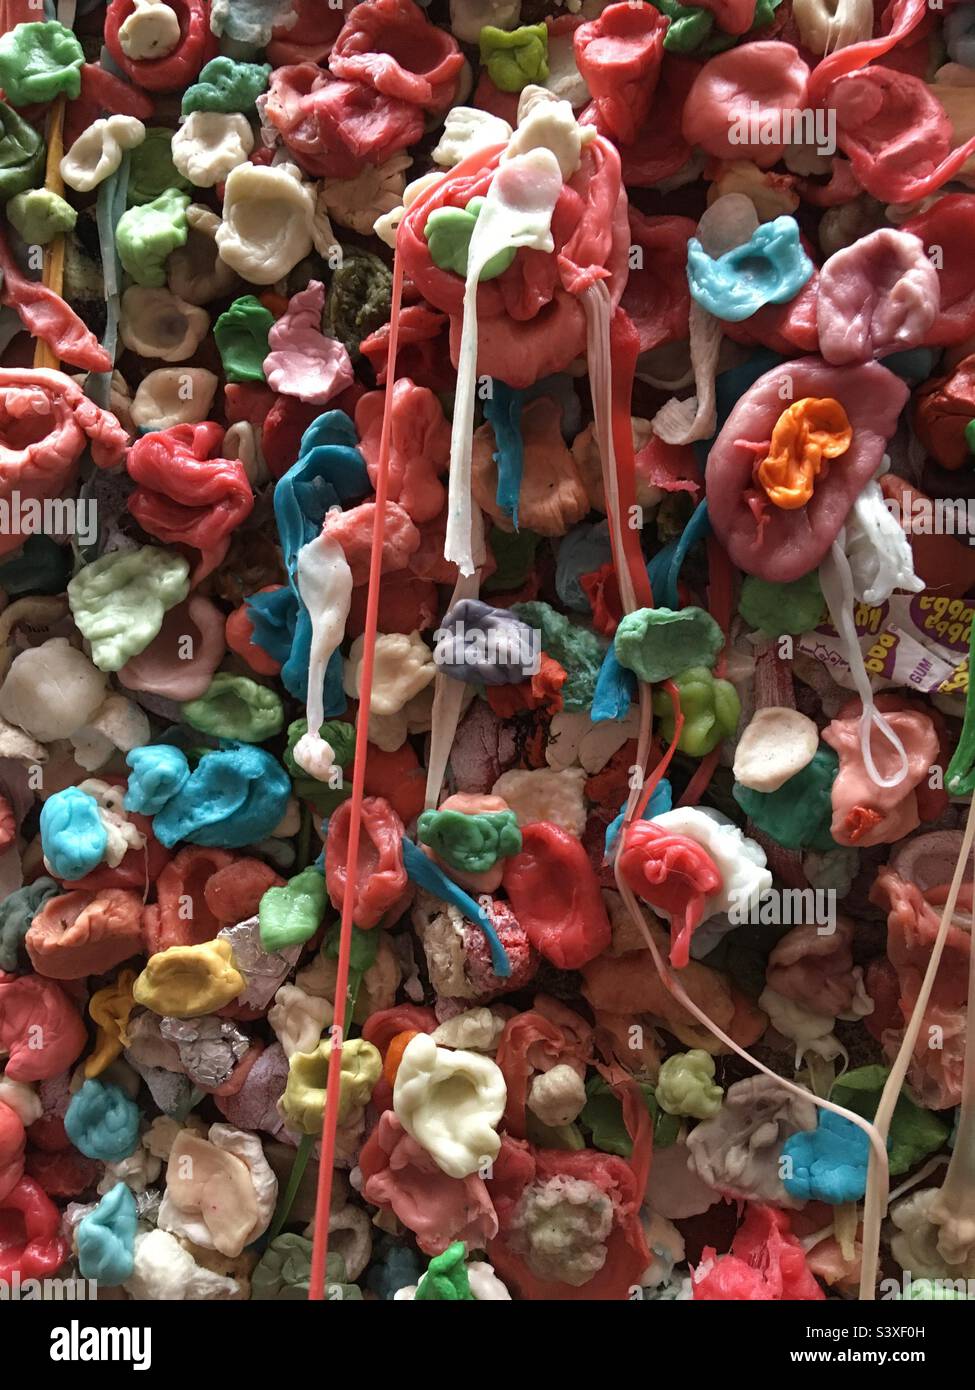 The Gum Wall, Post Alley, Pike Place Market, Seattle, Washington Stockfoto